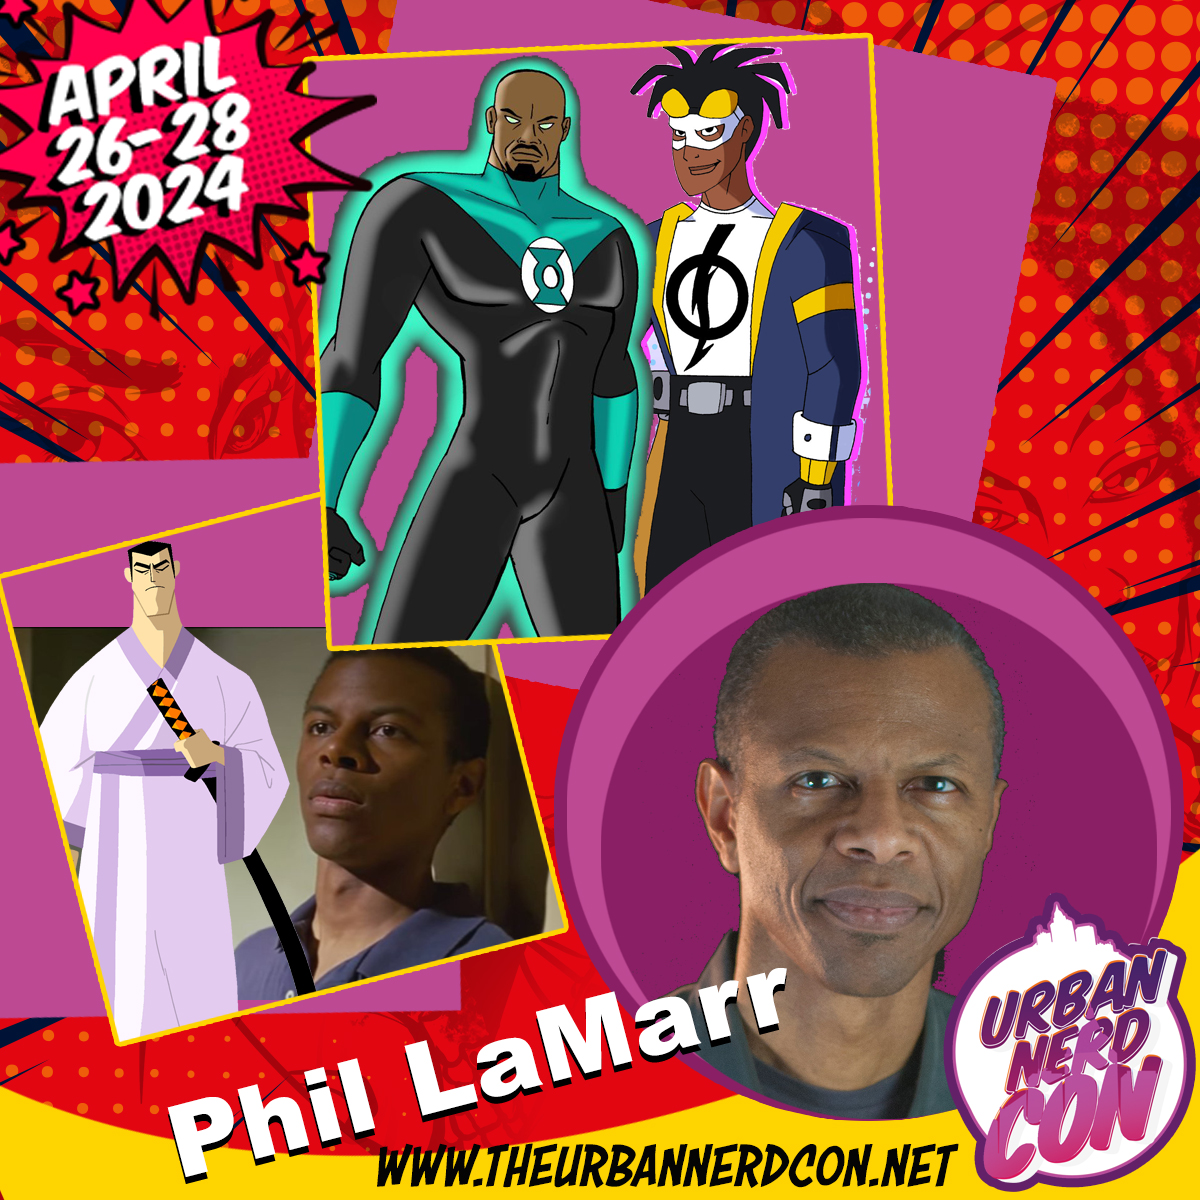 One of our final 3 BIG announcements! Say hello to the legend @phillamarr! He is making his way to the ATL! Get your badges NOW! Static & Ebon @moviestarg will be in the building April 26th-28th Click For Badges: tuncbadges24.square.site @wsantanafilms @technchill___